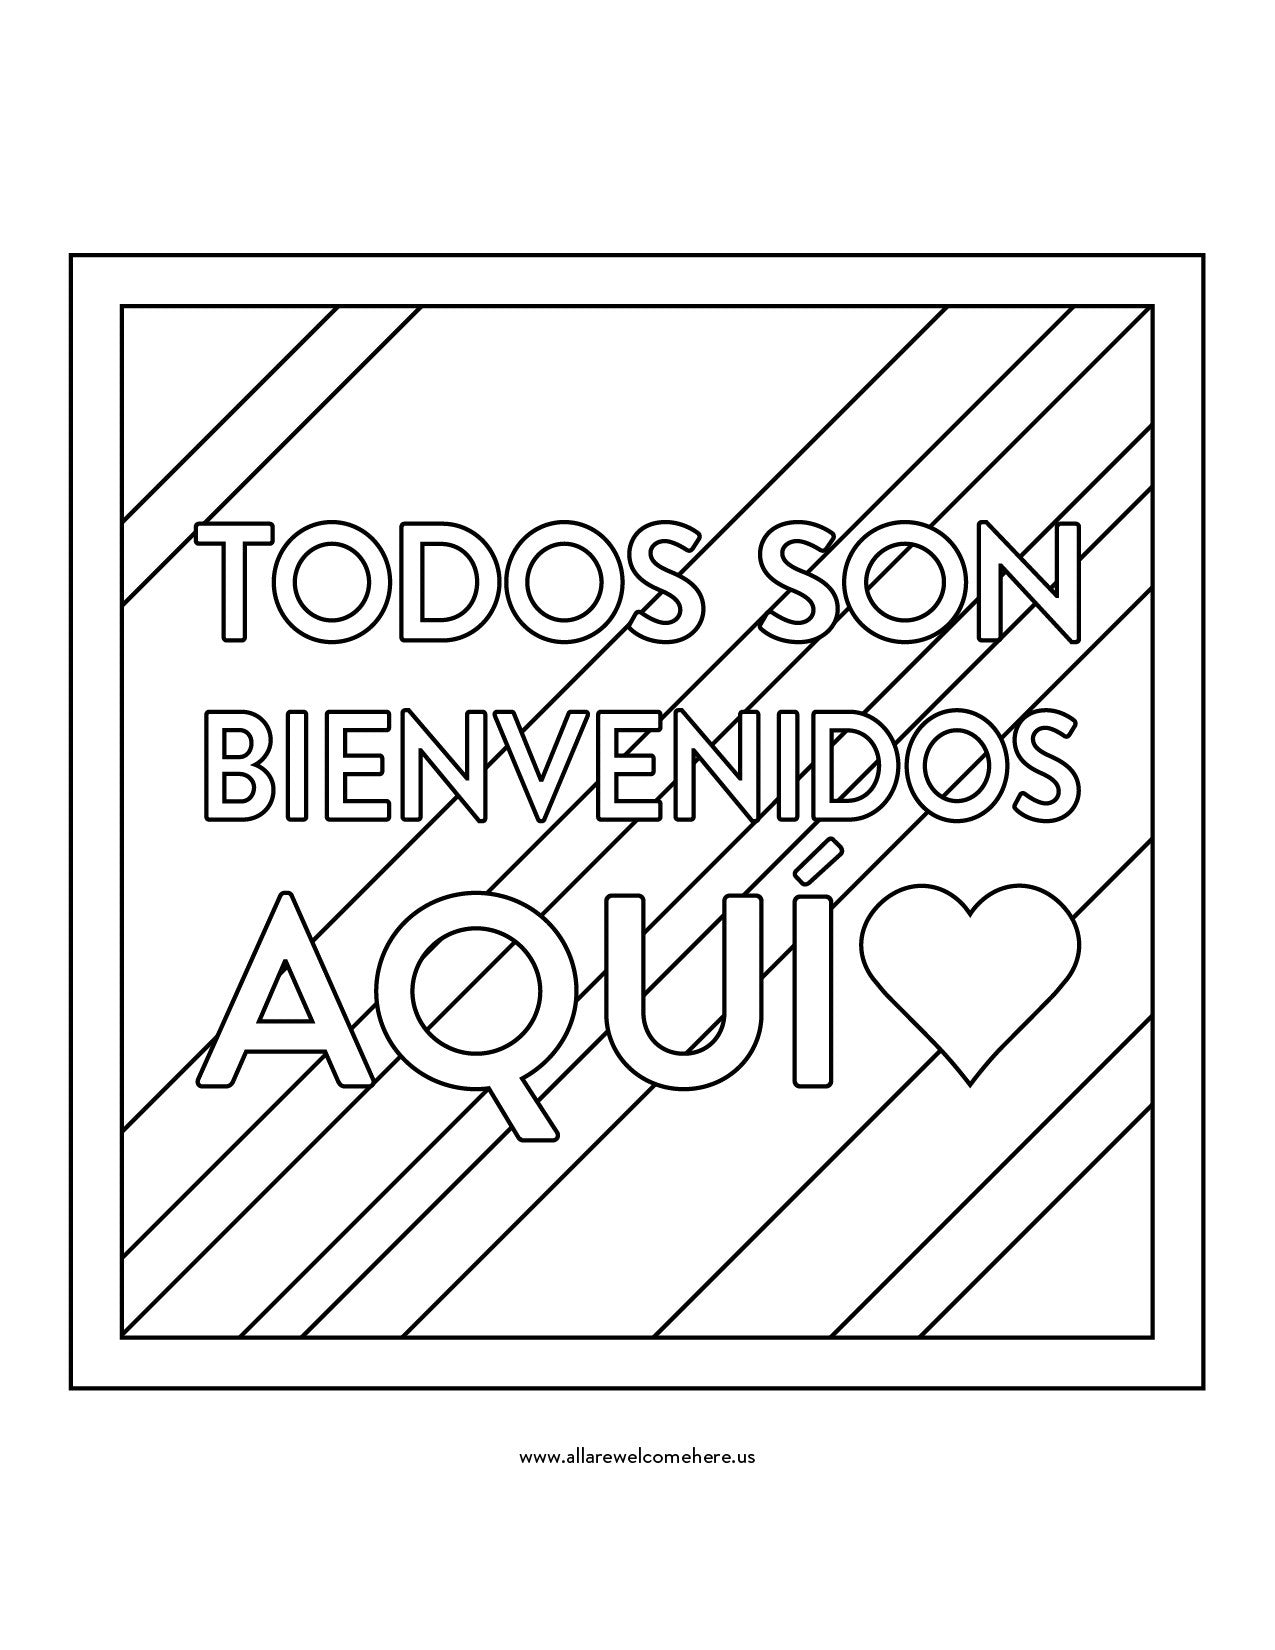 Download Free Download: Spanish Coloring Sheet - All Are Welcome Here